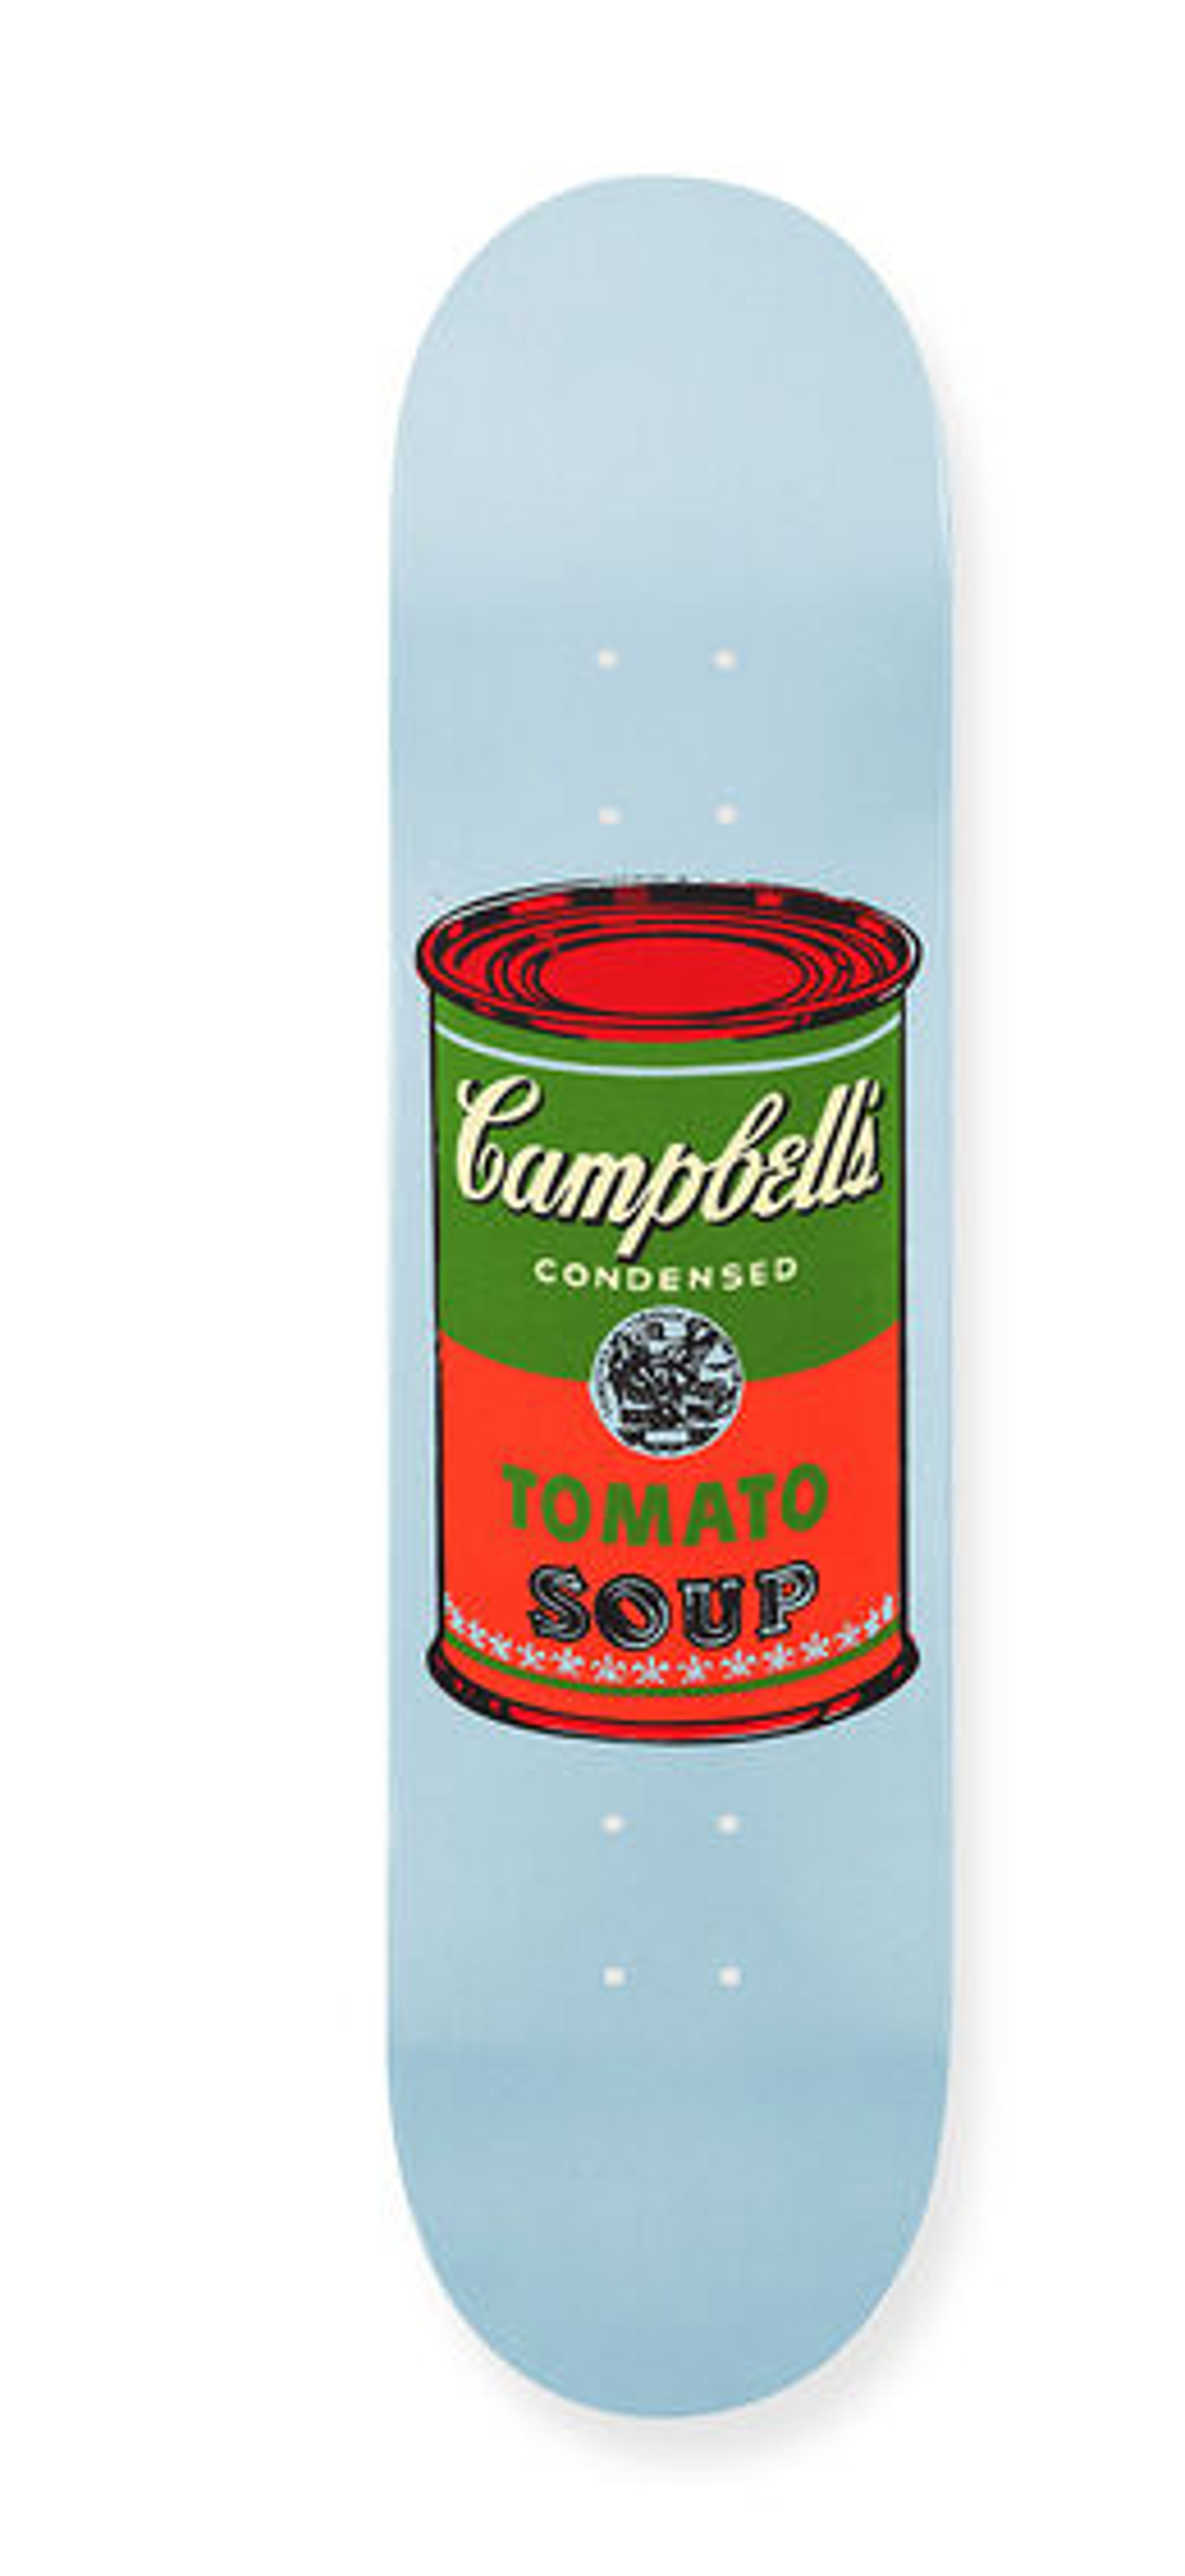 Campbell's Soup Skate Deck (Blue with Red Can) by Andy Warhol